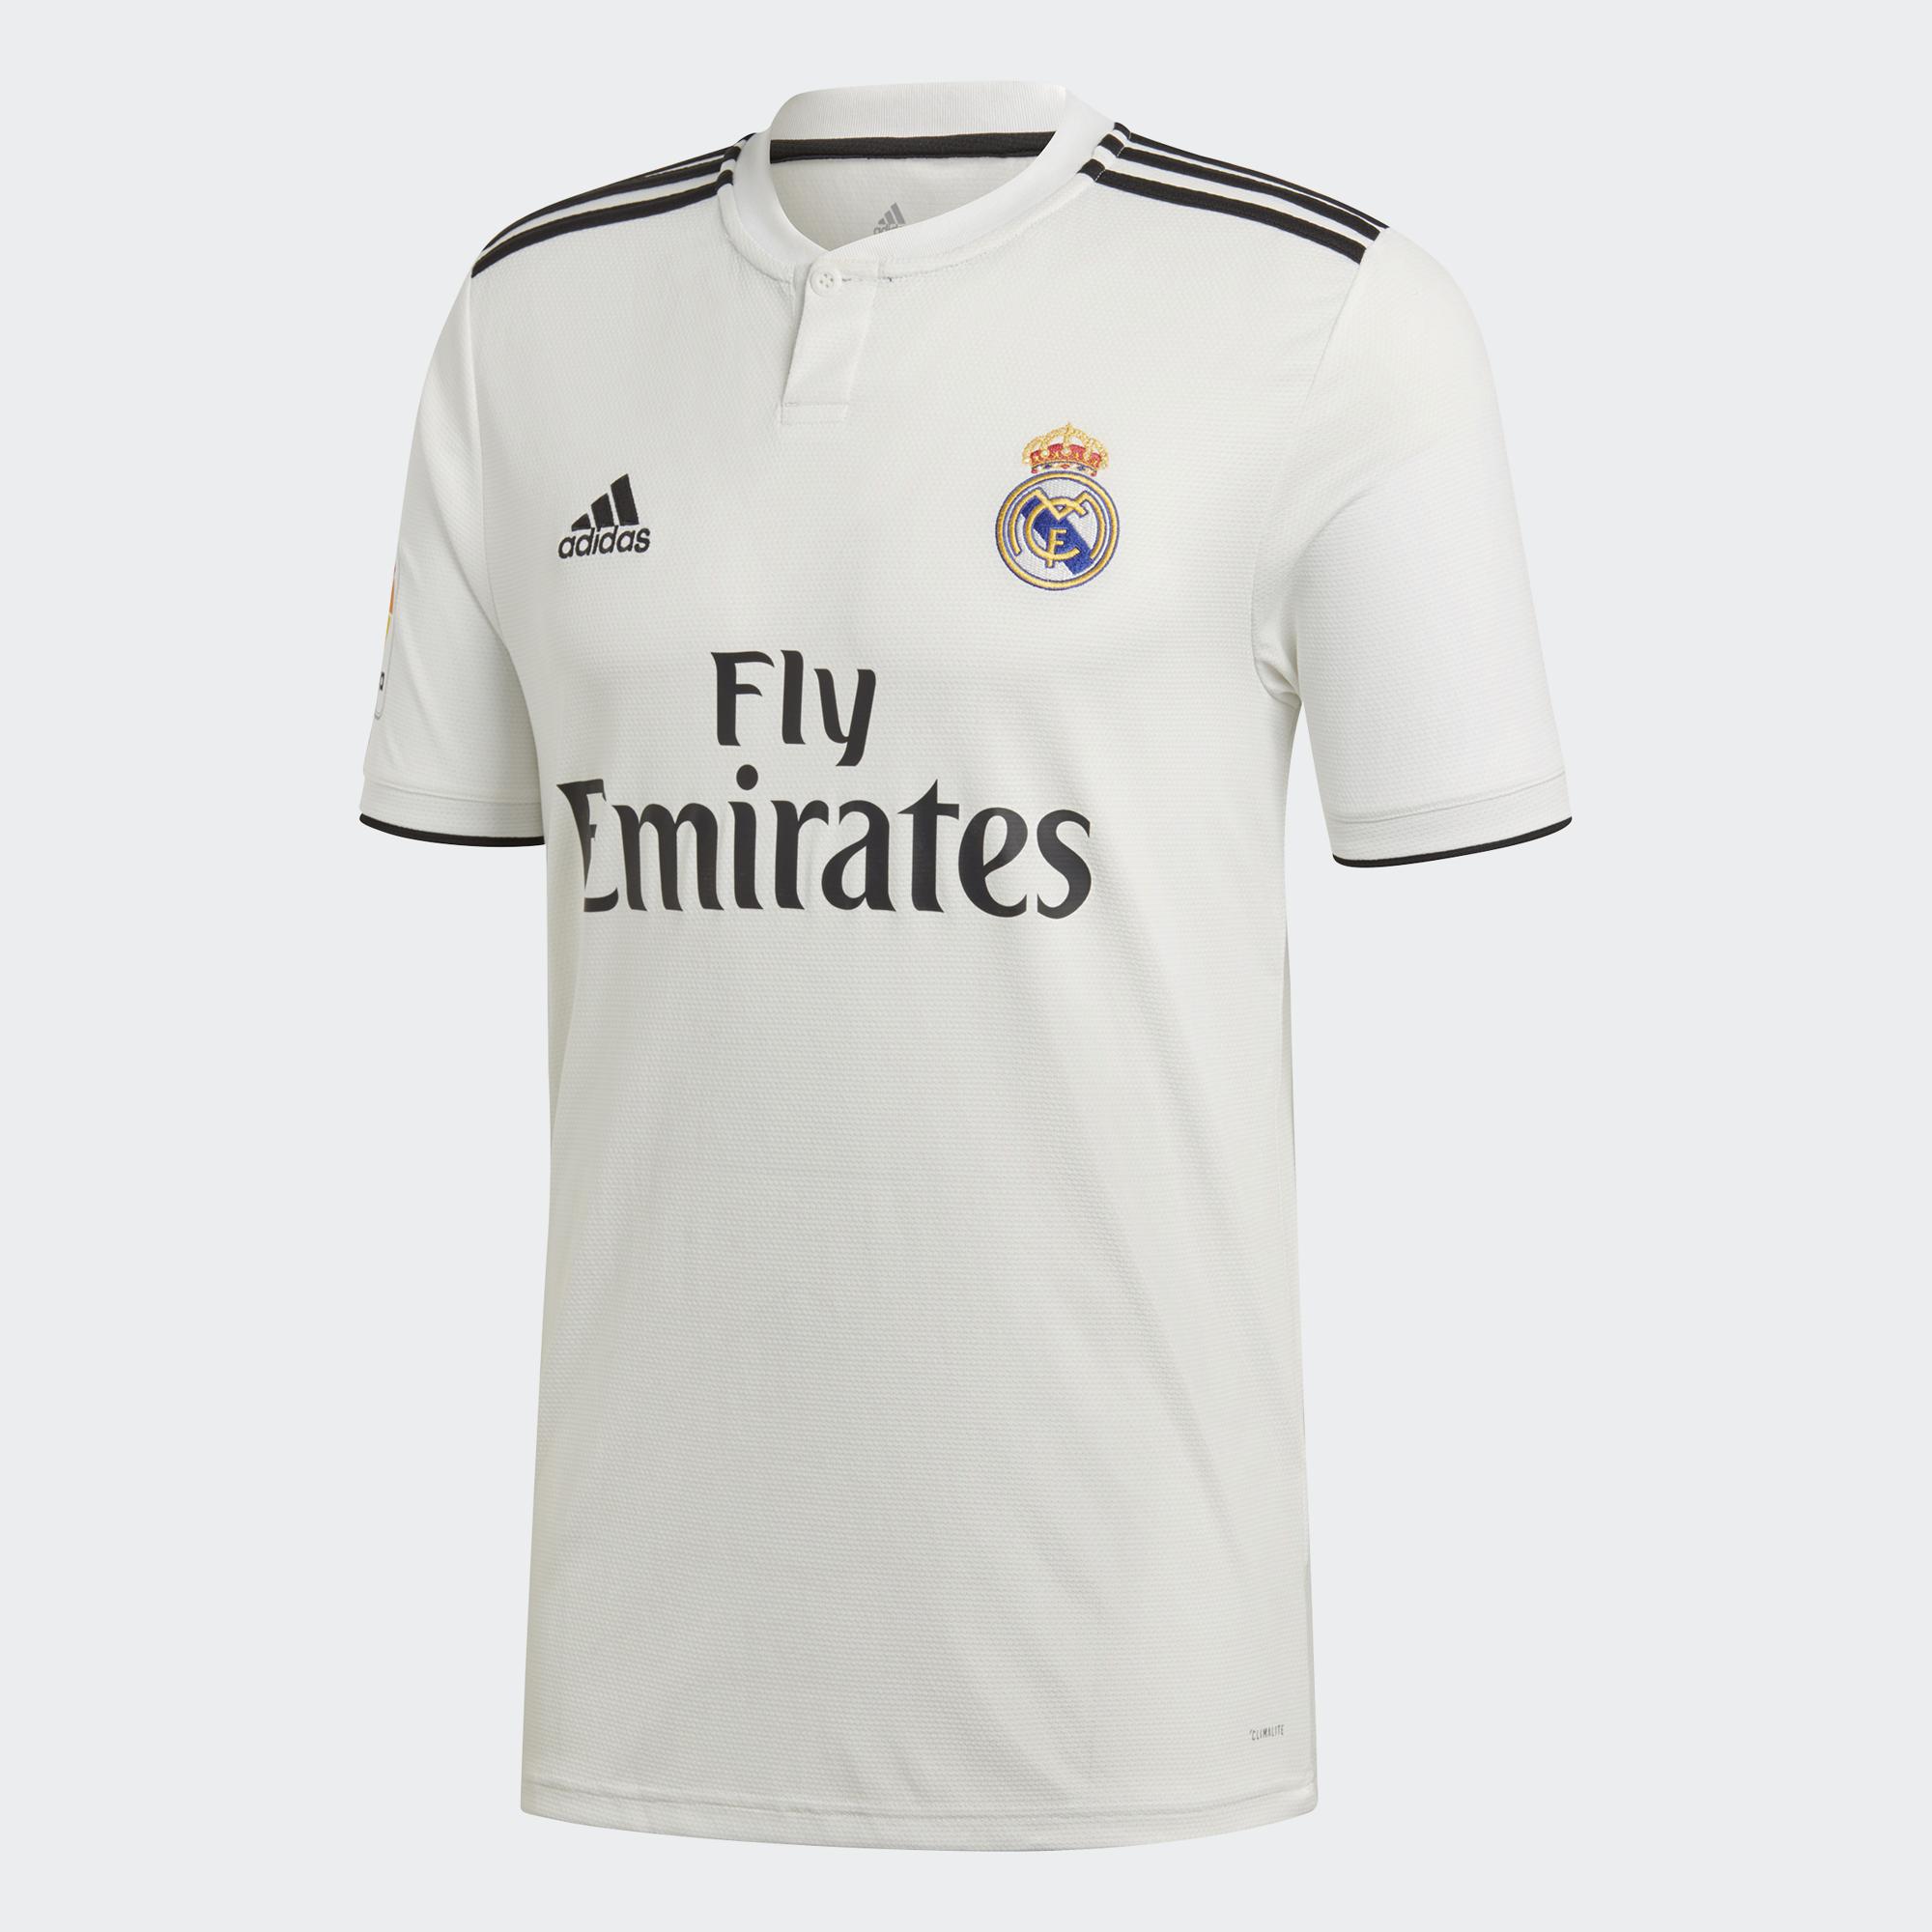 Adidas Maillot De Match Home Real Madrid   18/19